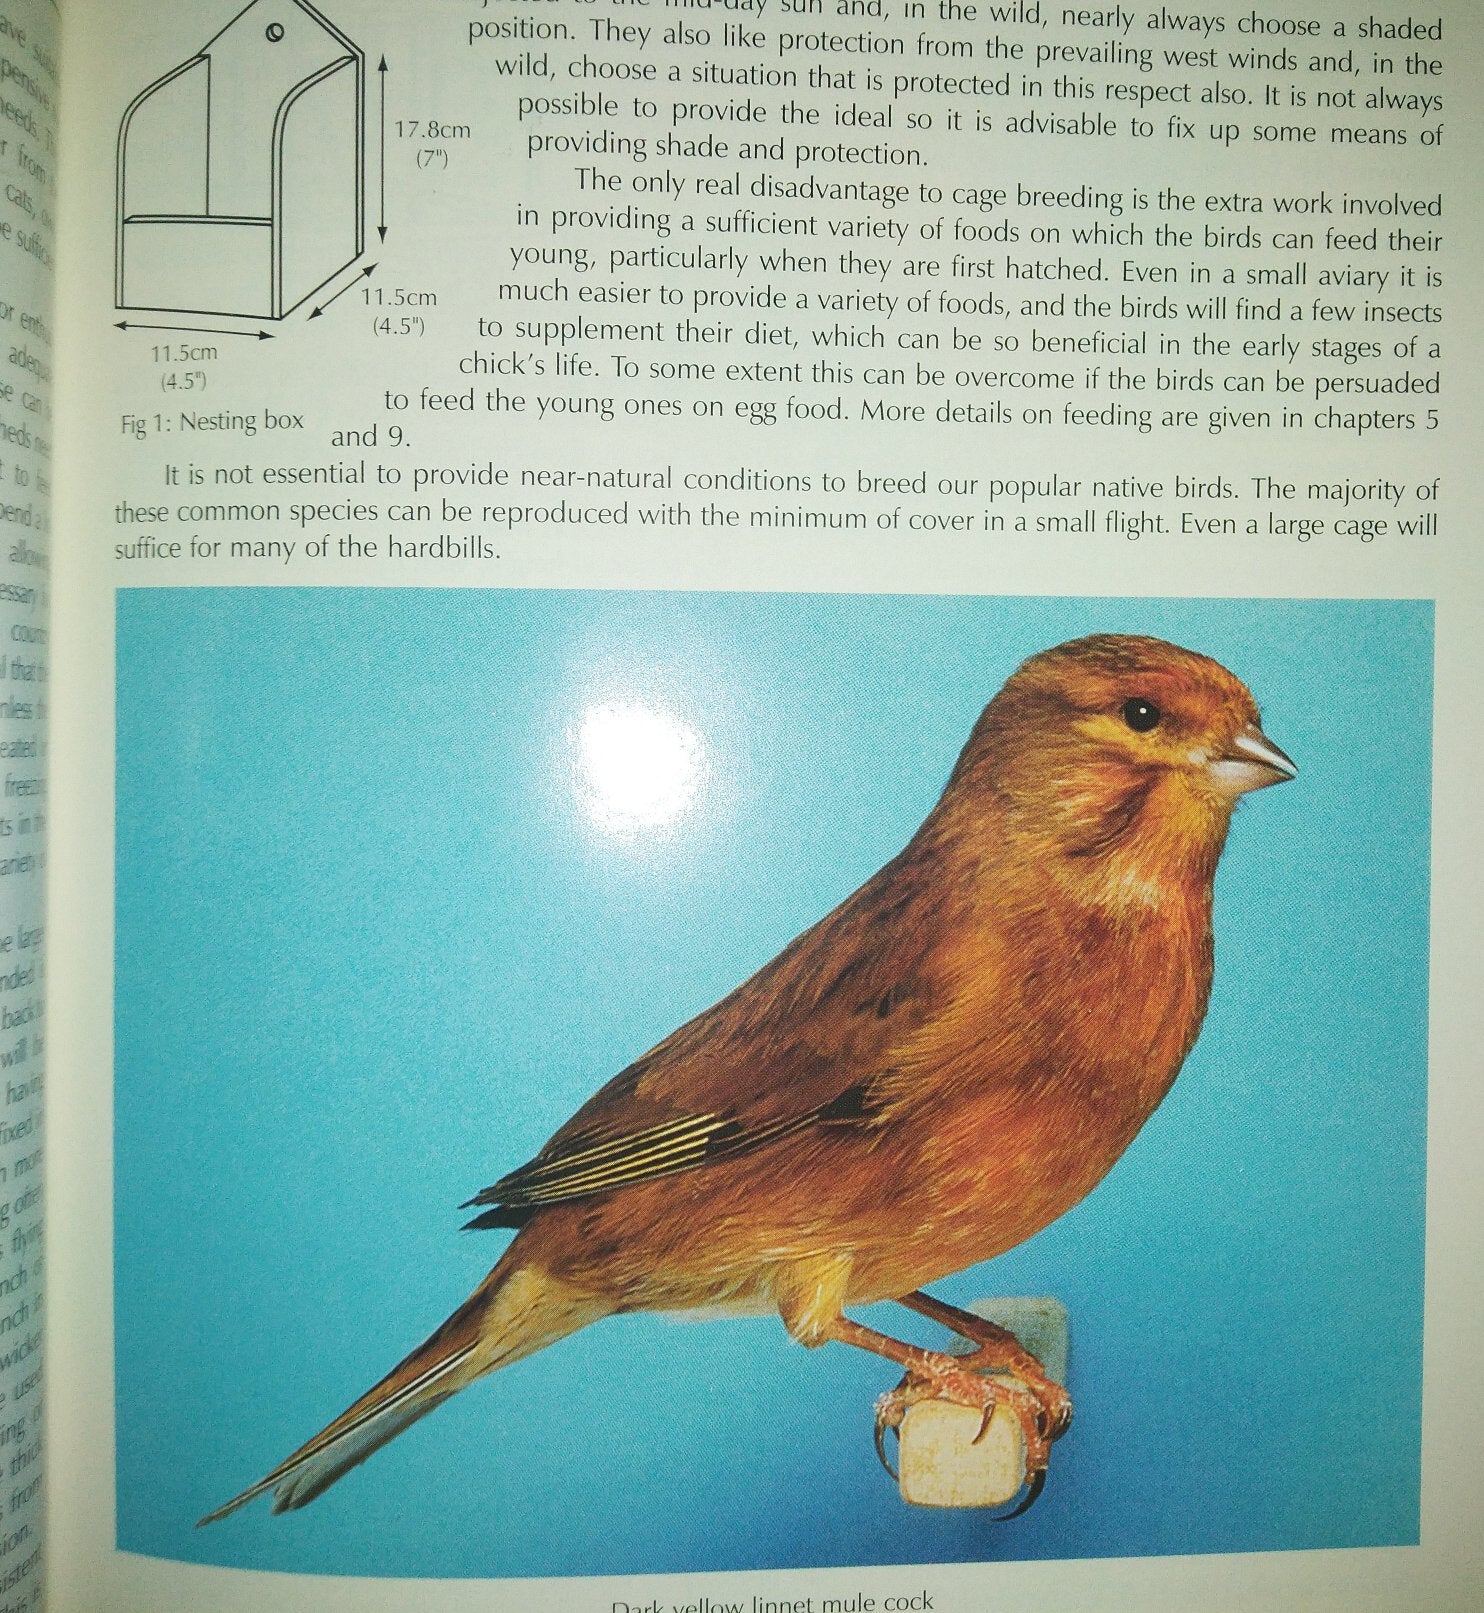 Redpolls, Twites and Linnets: Popular British Birds in Aviculture by Peter Lander, Bob Partridge